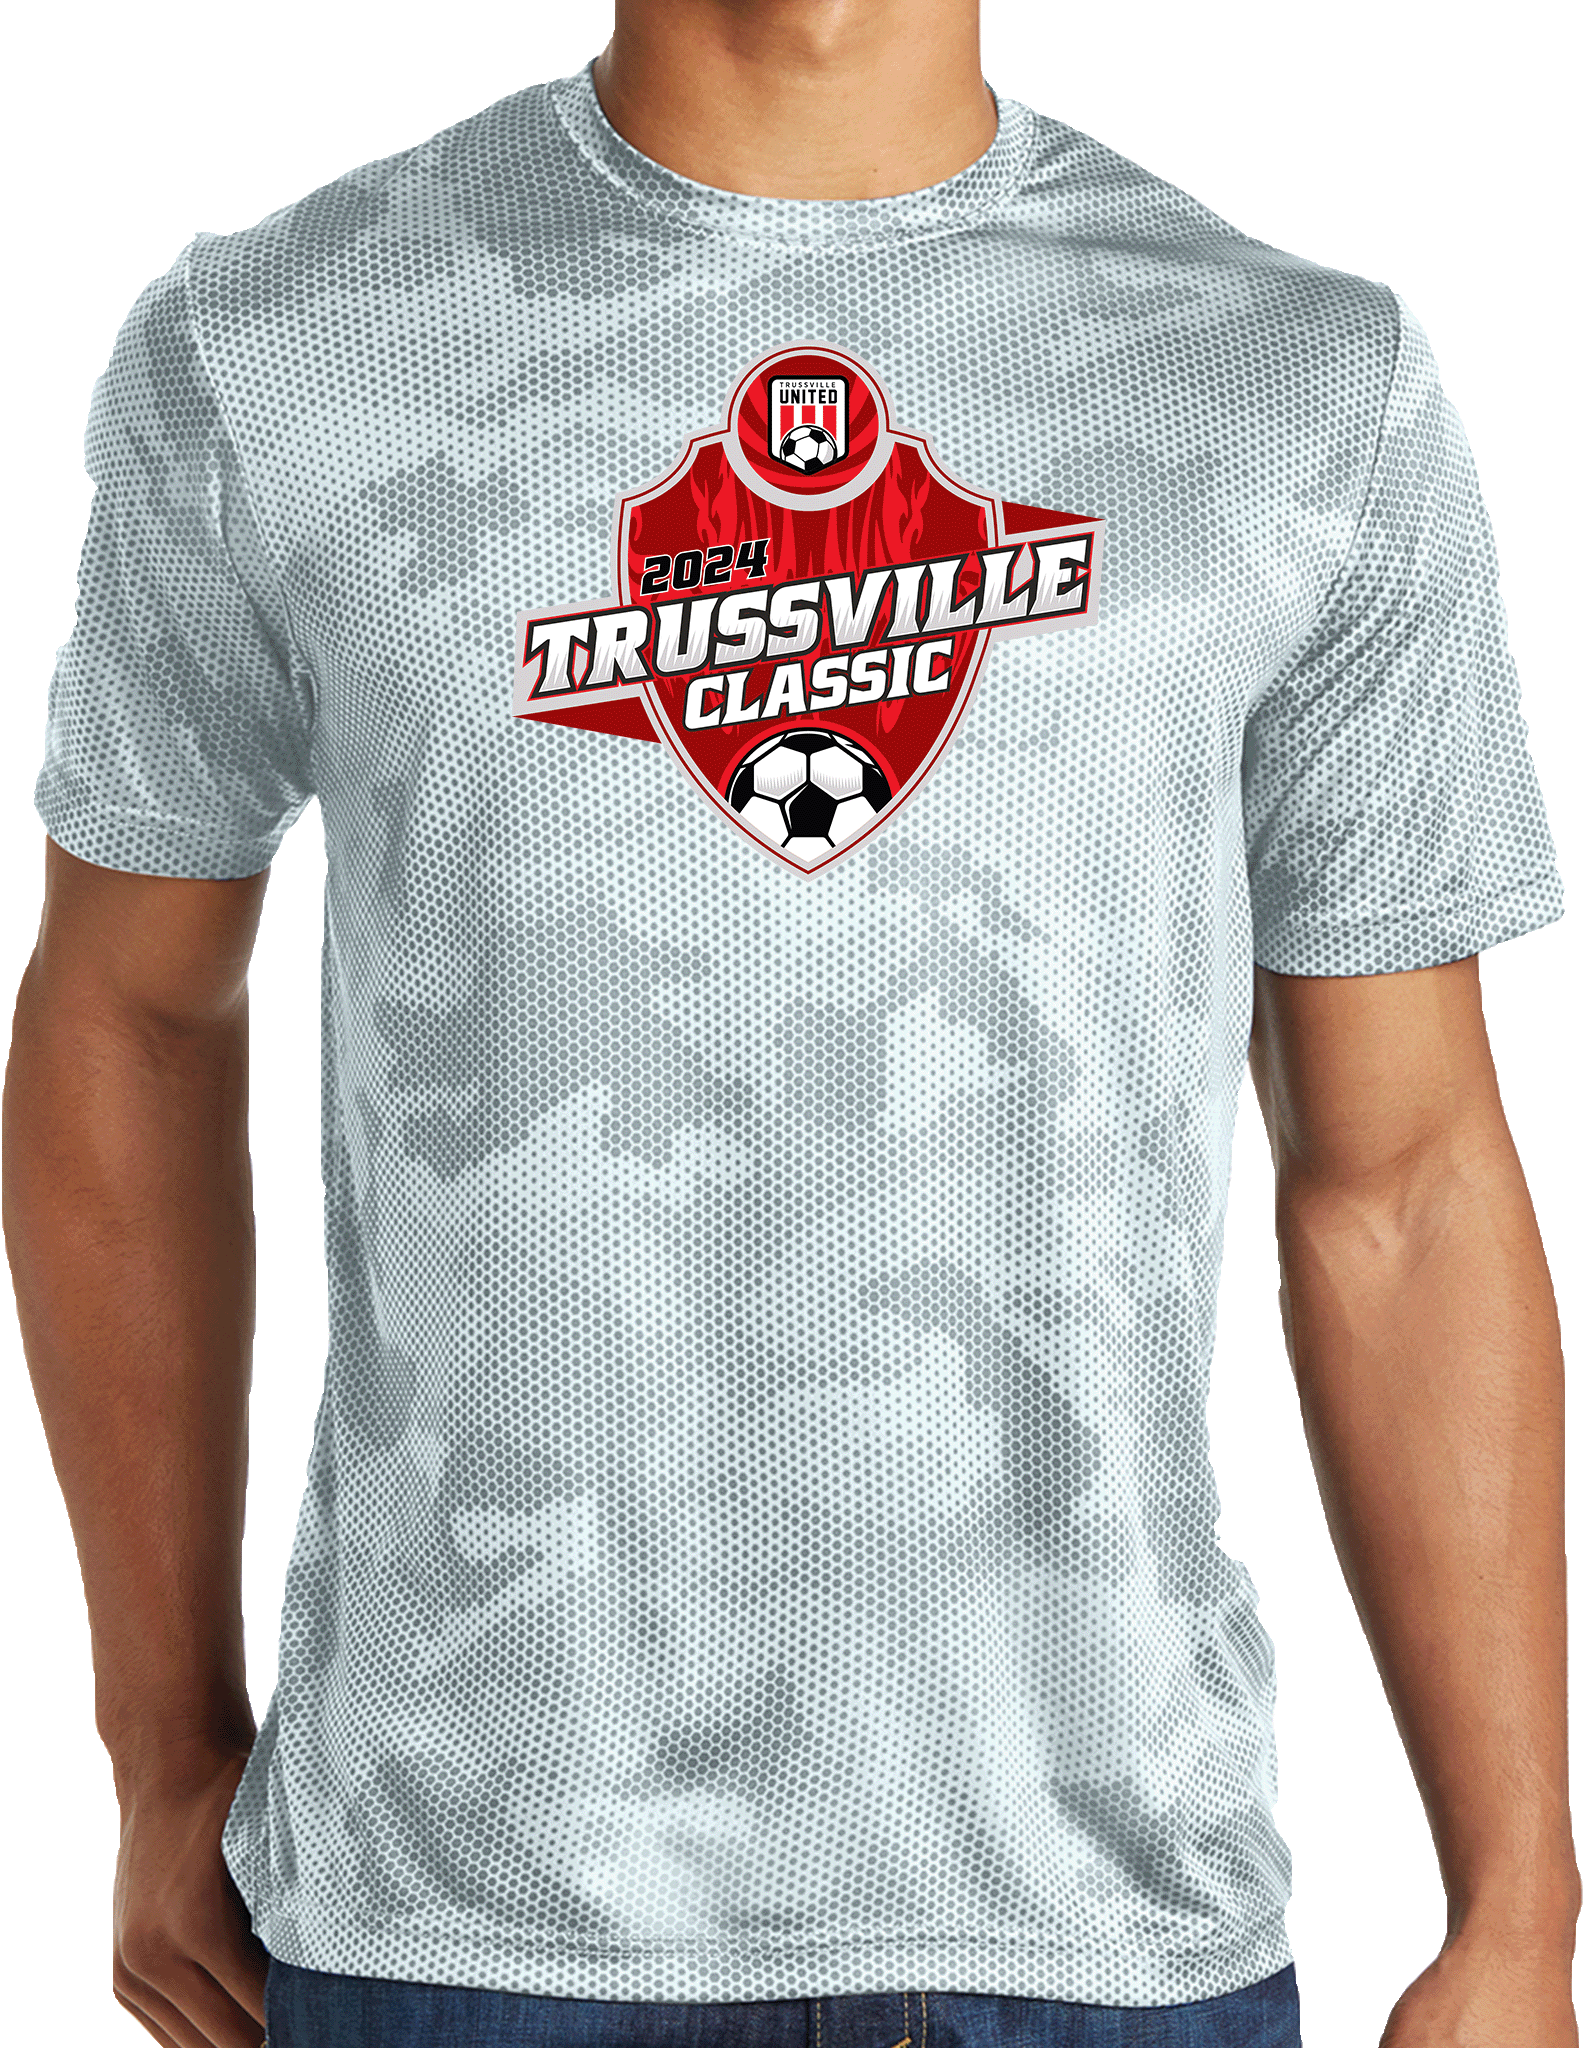 Performance Shirts - 2024 Trussville Classic